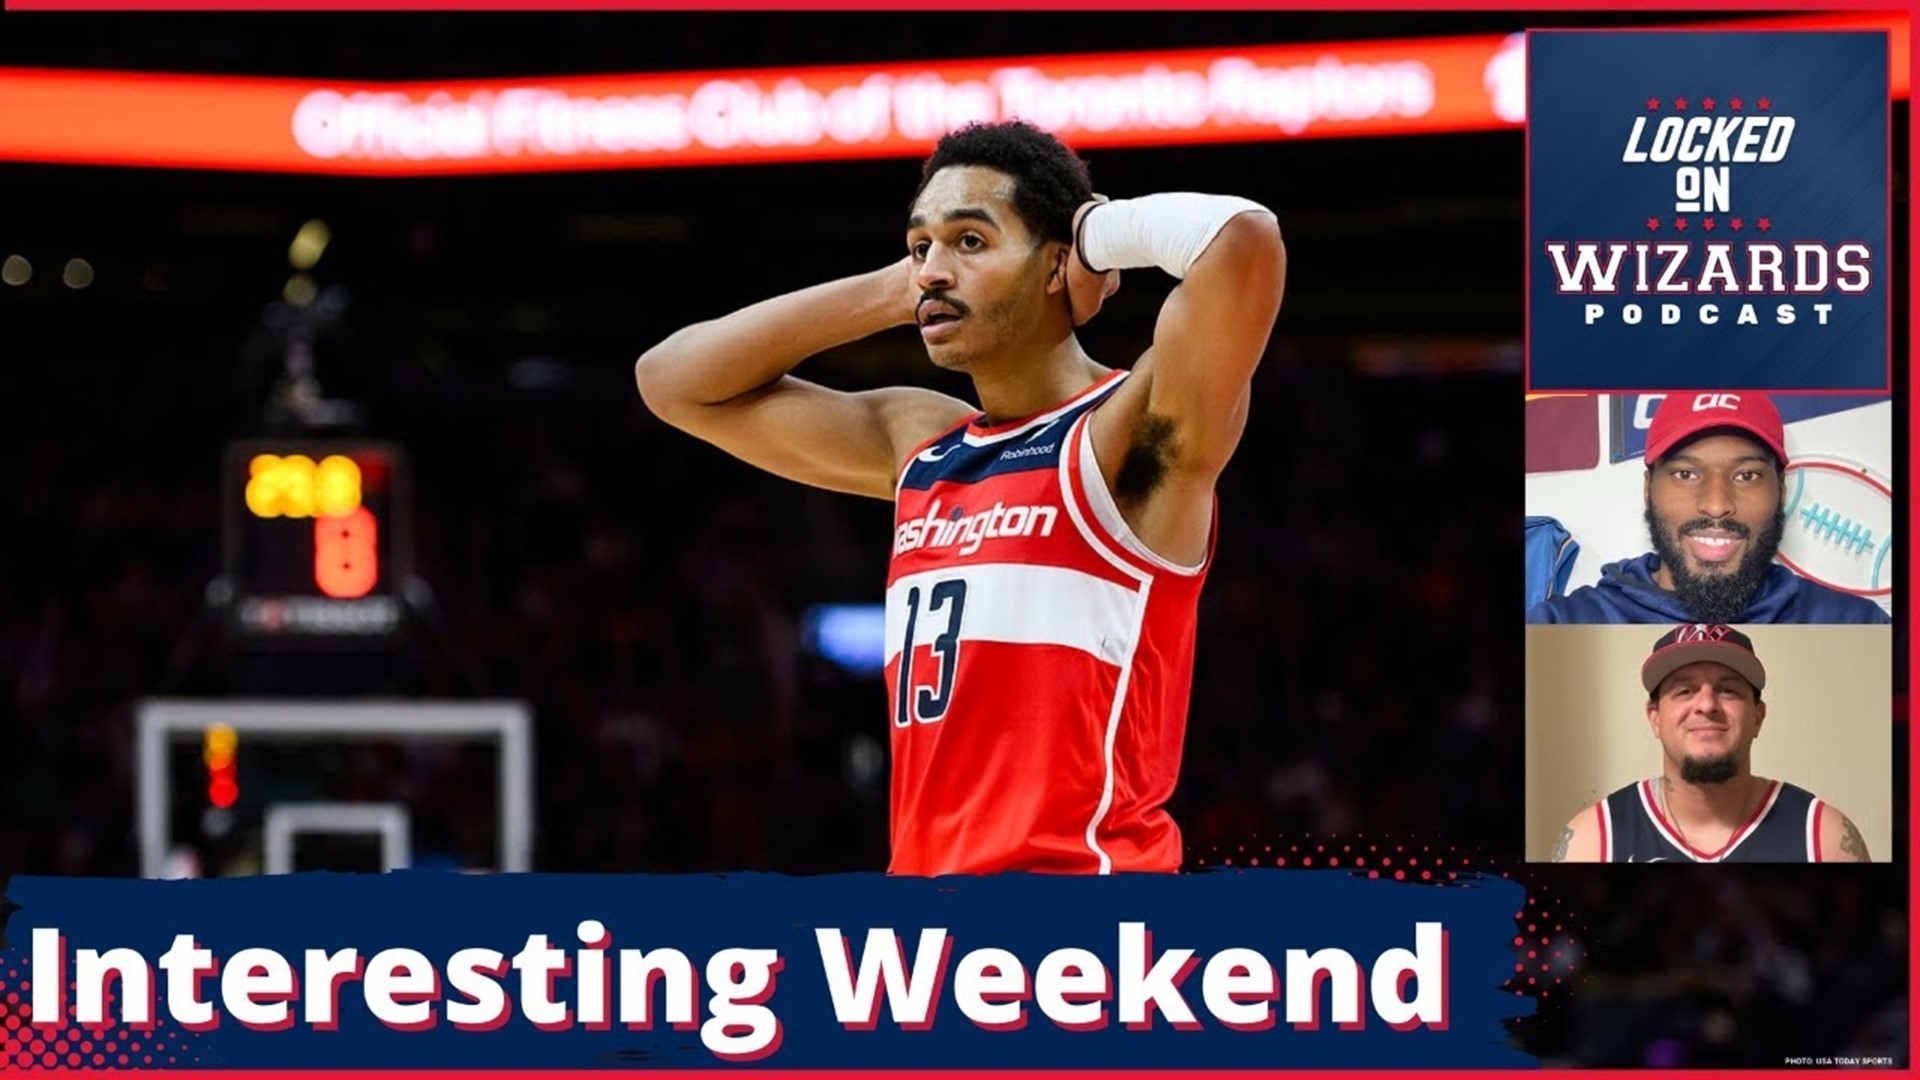 Ed and Brandon recap the Wizards losses vs OKC Thunder and the Cleveland Cavs. They also discuss whether Jordan Poole has turned a corner.